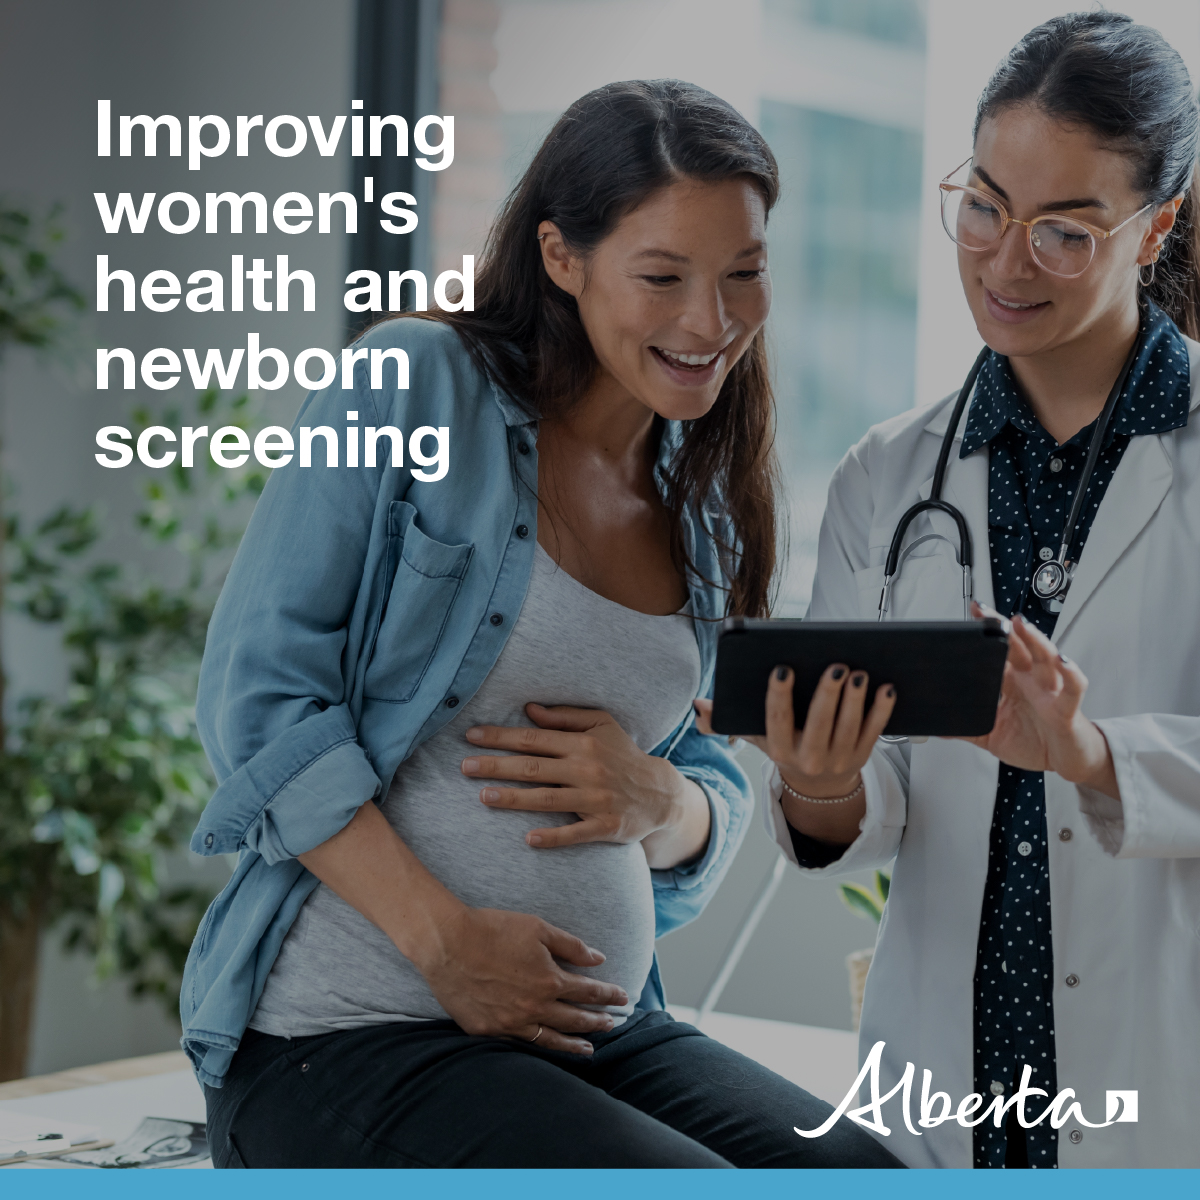 We’re investing in the health and well-being of women and children with $20M over two years in new funding to support research on common women’s health conditions and $6 million to expand the Alberta Newborn Screening Program: alberta.ca/release.cfm?xI…